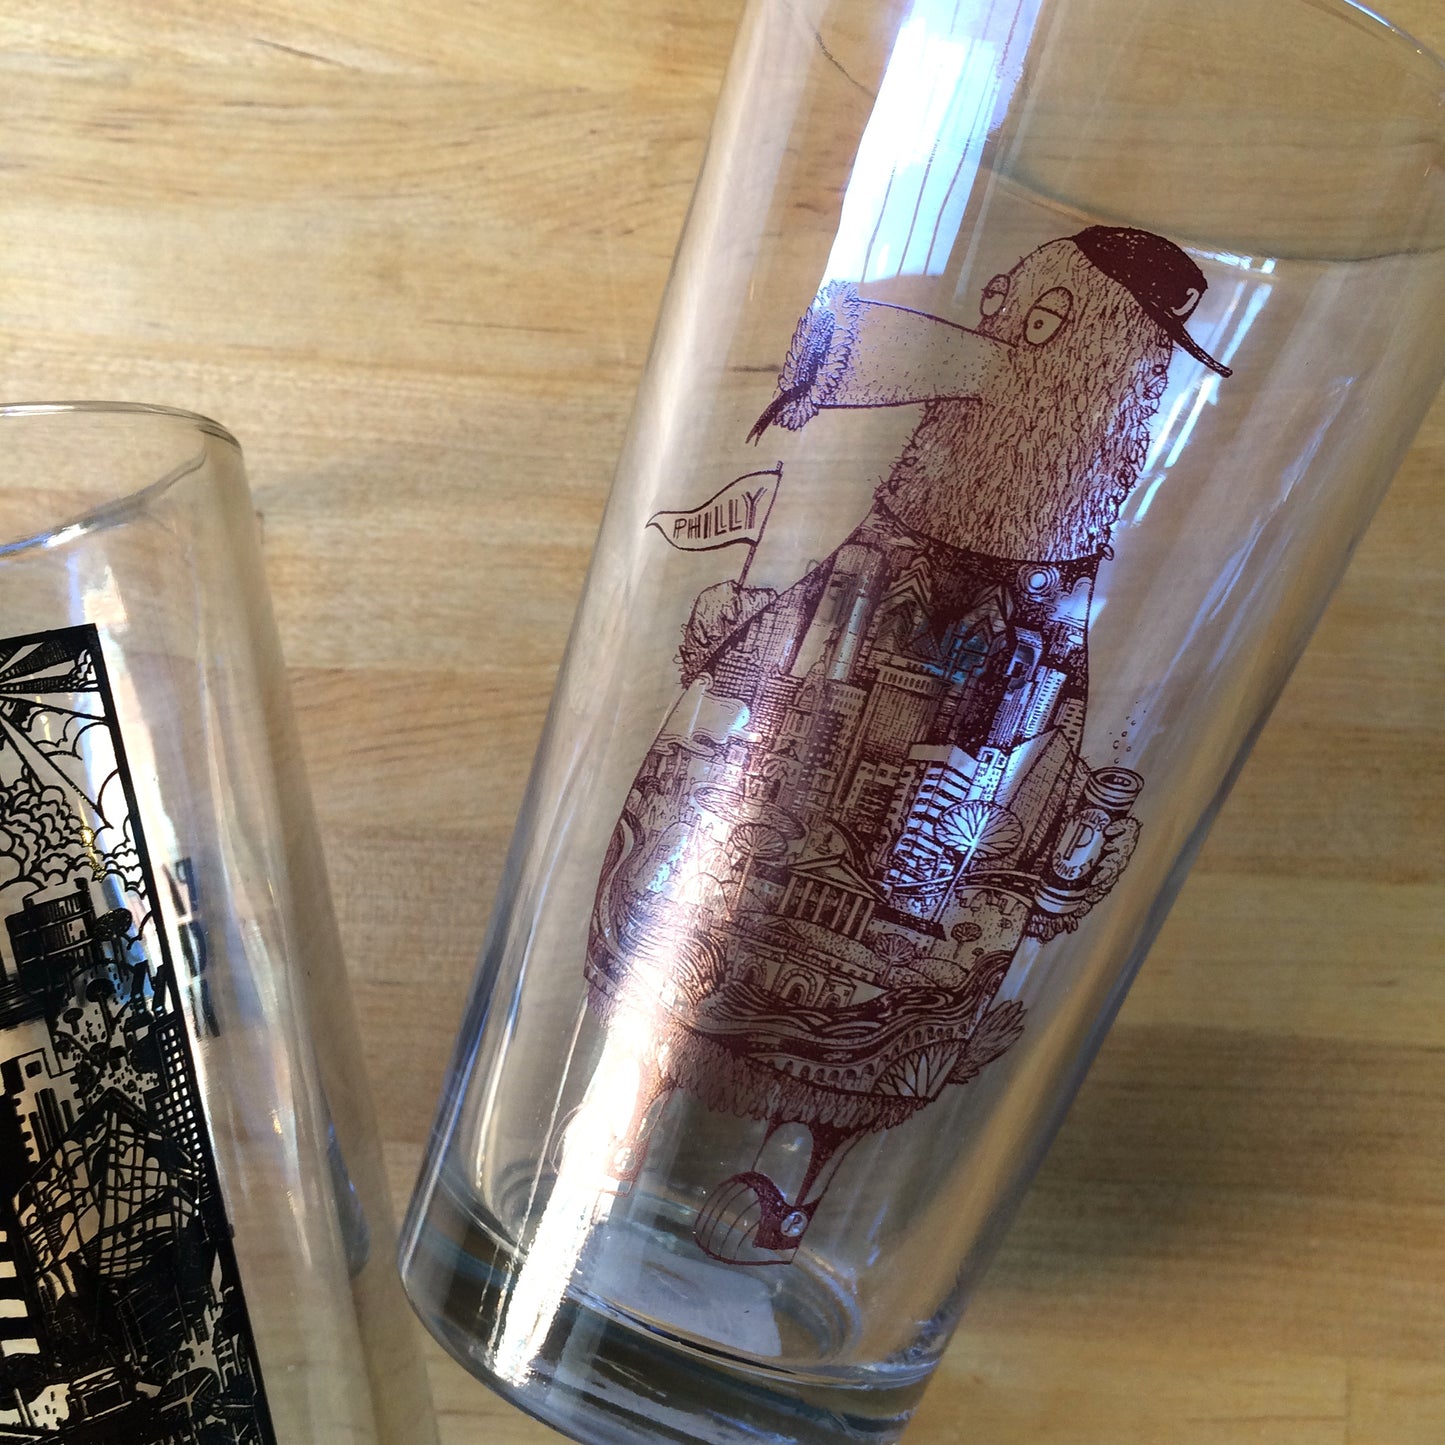 Two decorative Philly Pint Glasses with intricate designs, one featuring a depiction of a character and Philadelphia-themed skyline by Paul Carpenter.